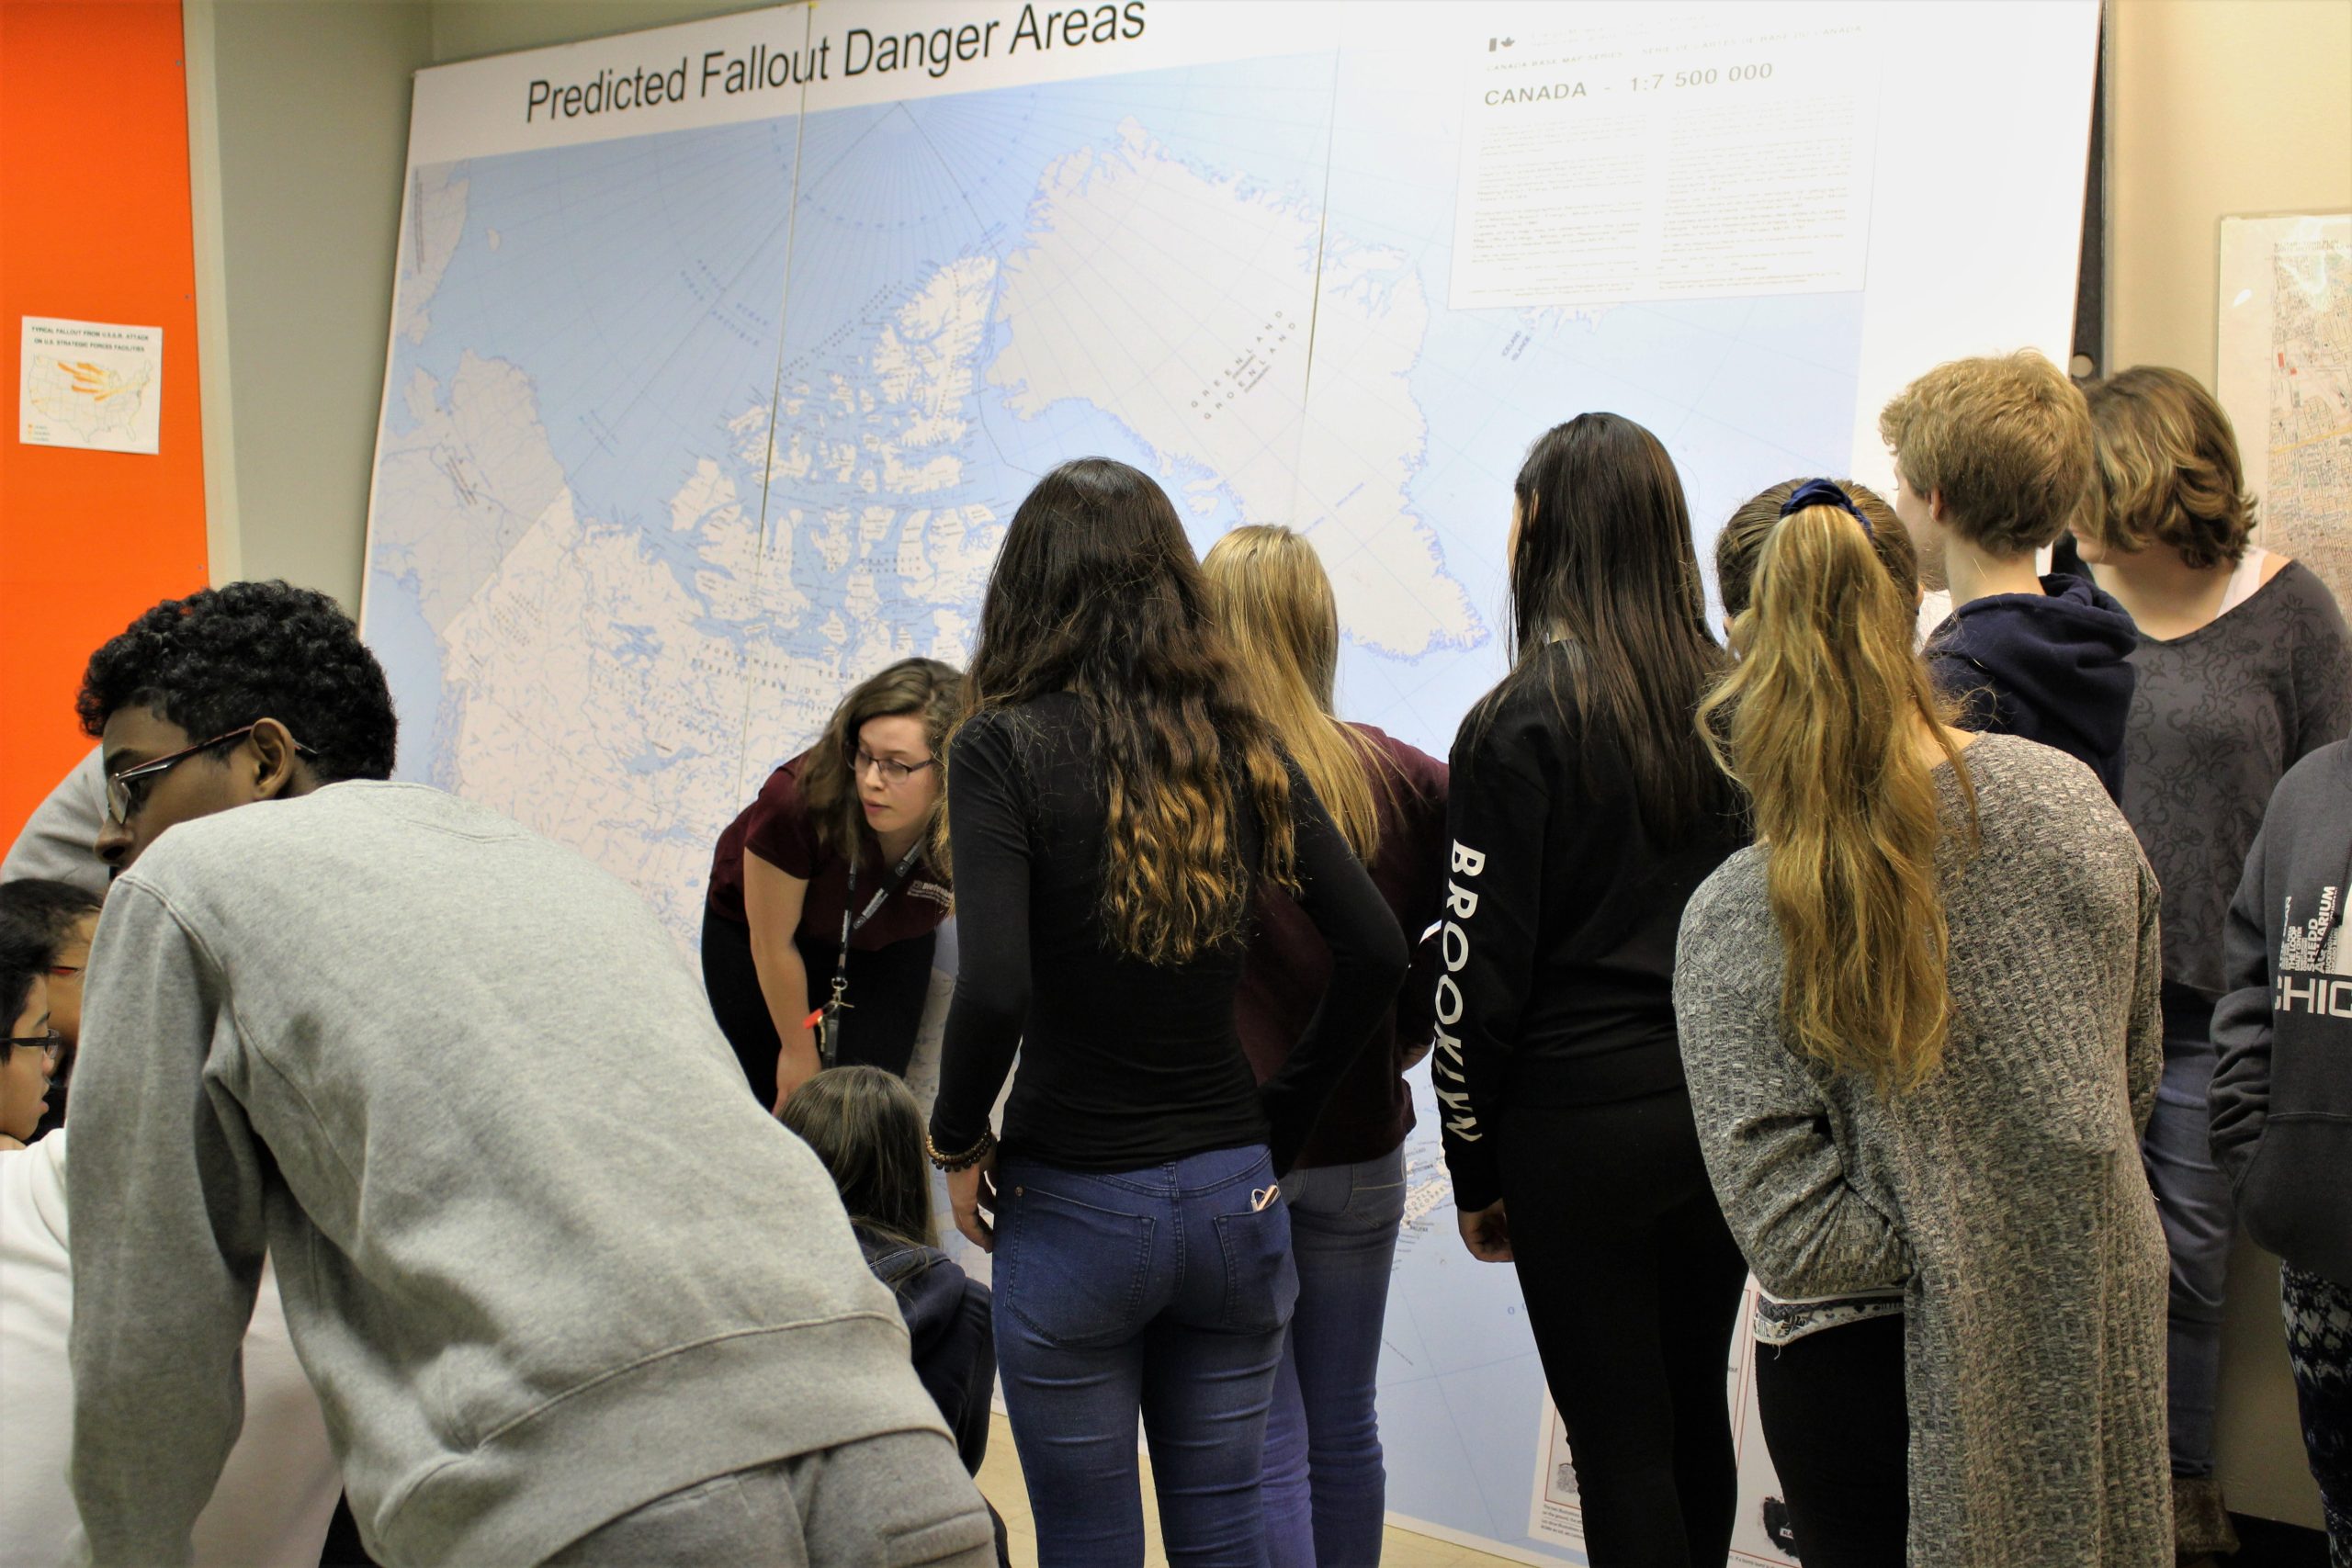 A group of students are in discussion as they stand around a map of Canada showing fallout zones.